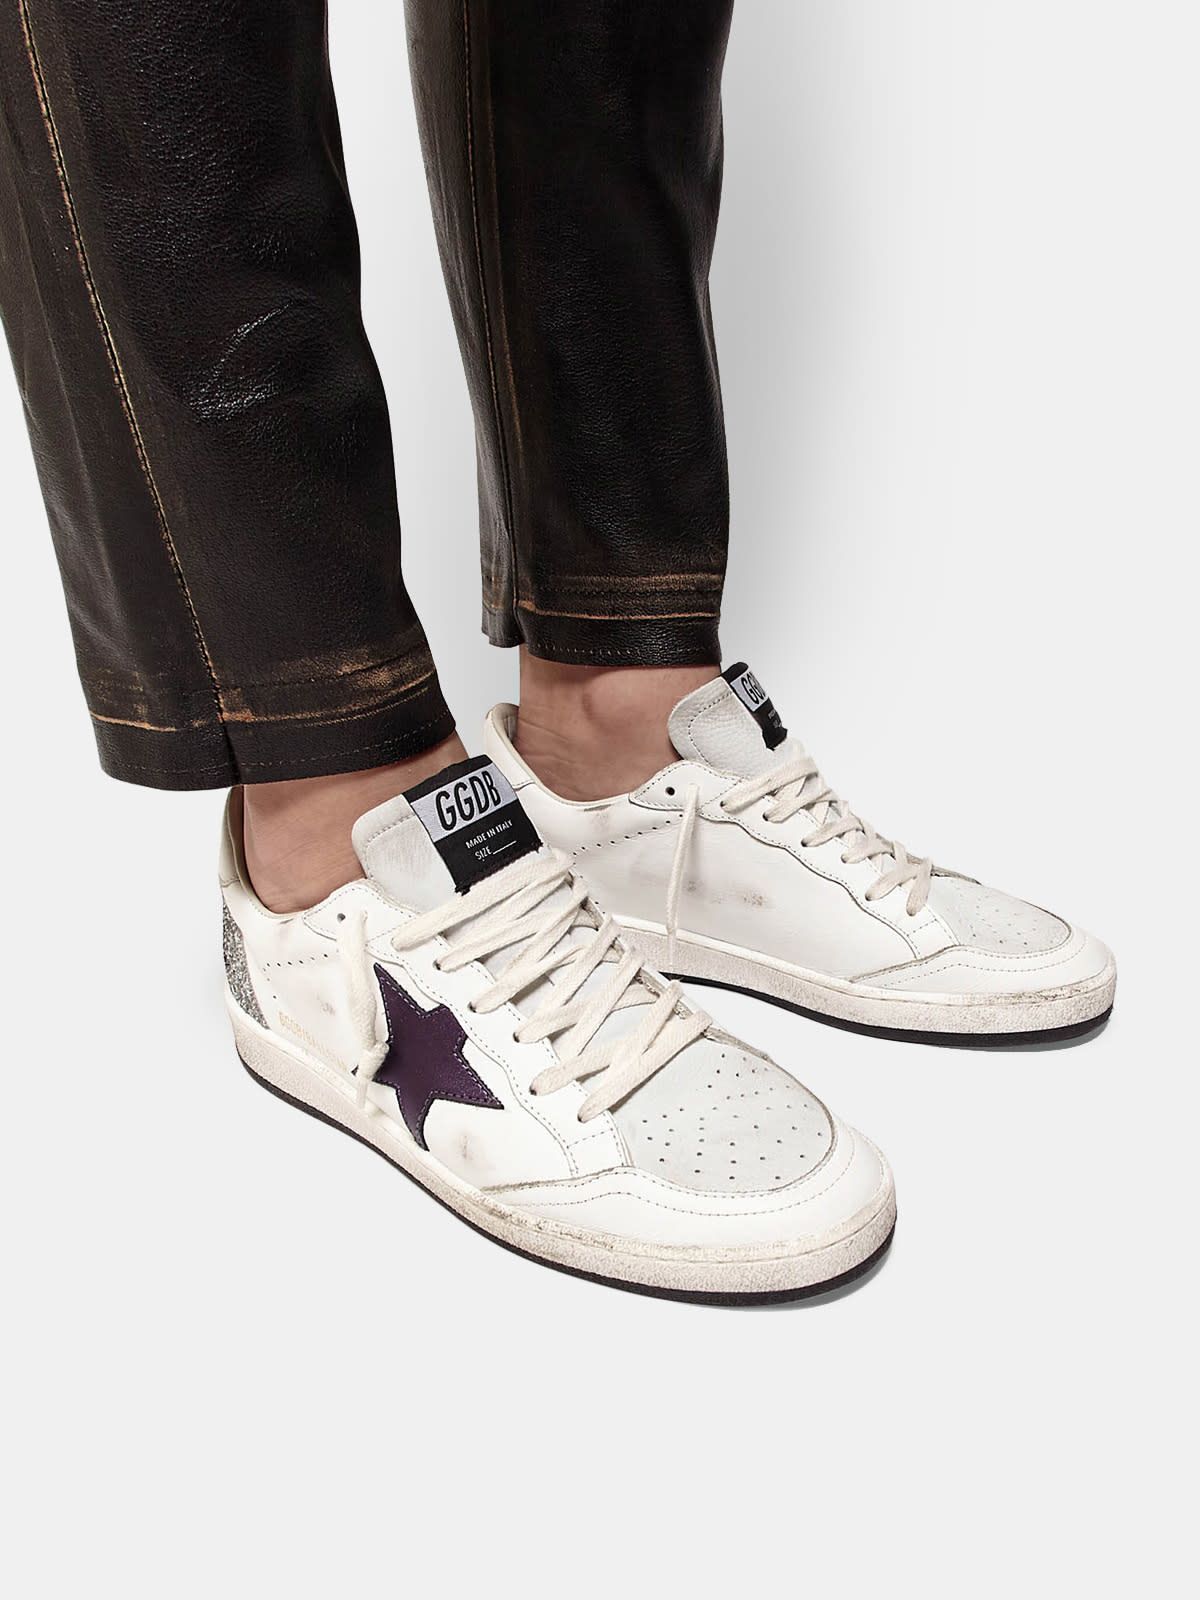 Ball Star sneakers with GGDB star and glittery heel tab